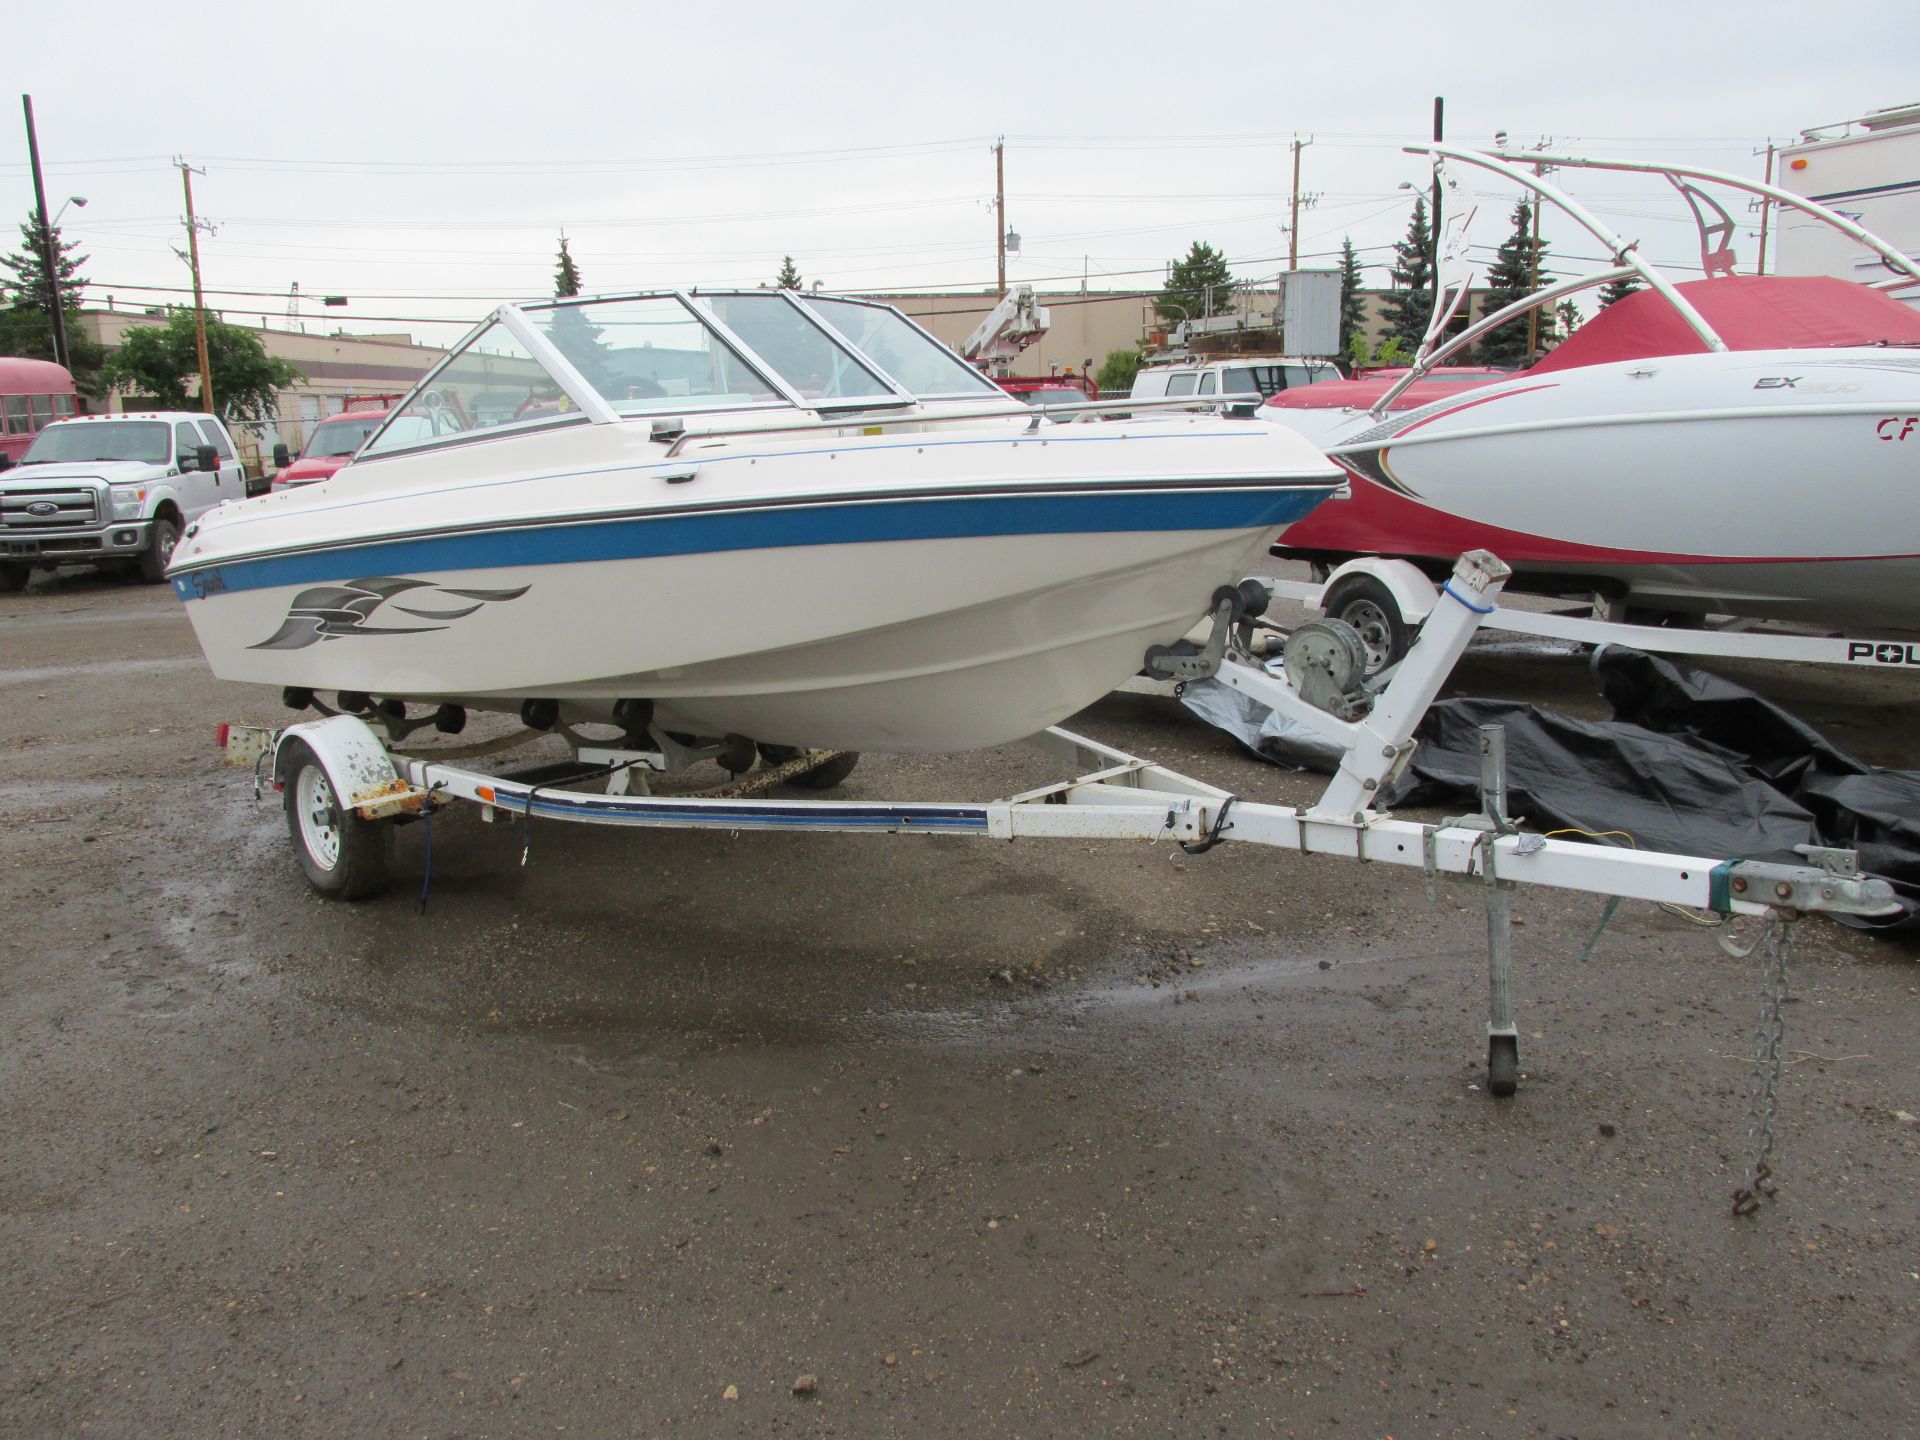 1992 SEASWIRL BOWRIDER 165SE OUTBOARD 115HP JOHNSON AUTOMATIC SN:BRCC057CE292 NOT REGISTERED NOTES: - Image 3 of 9